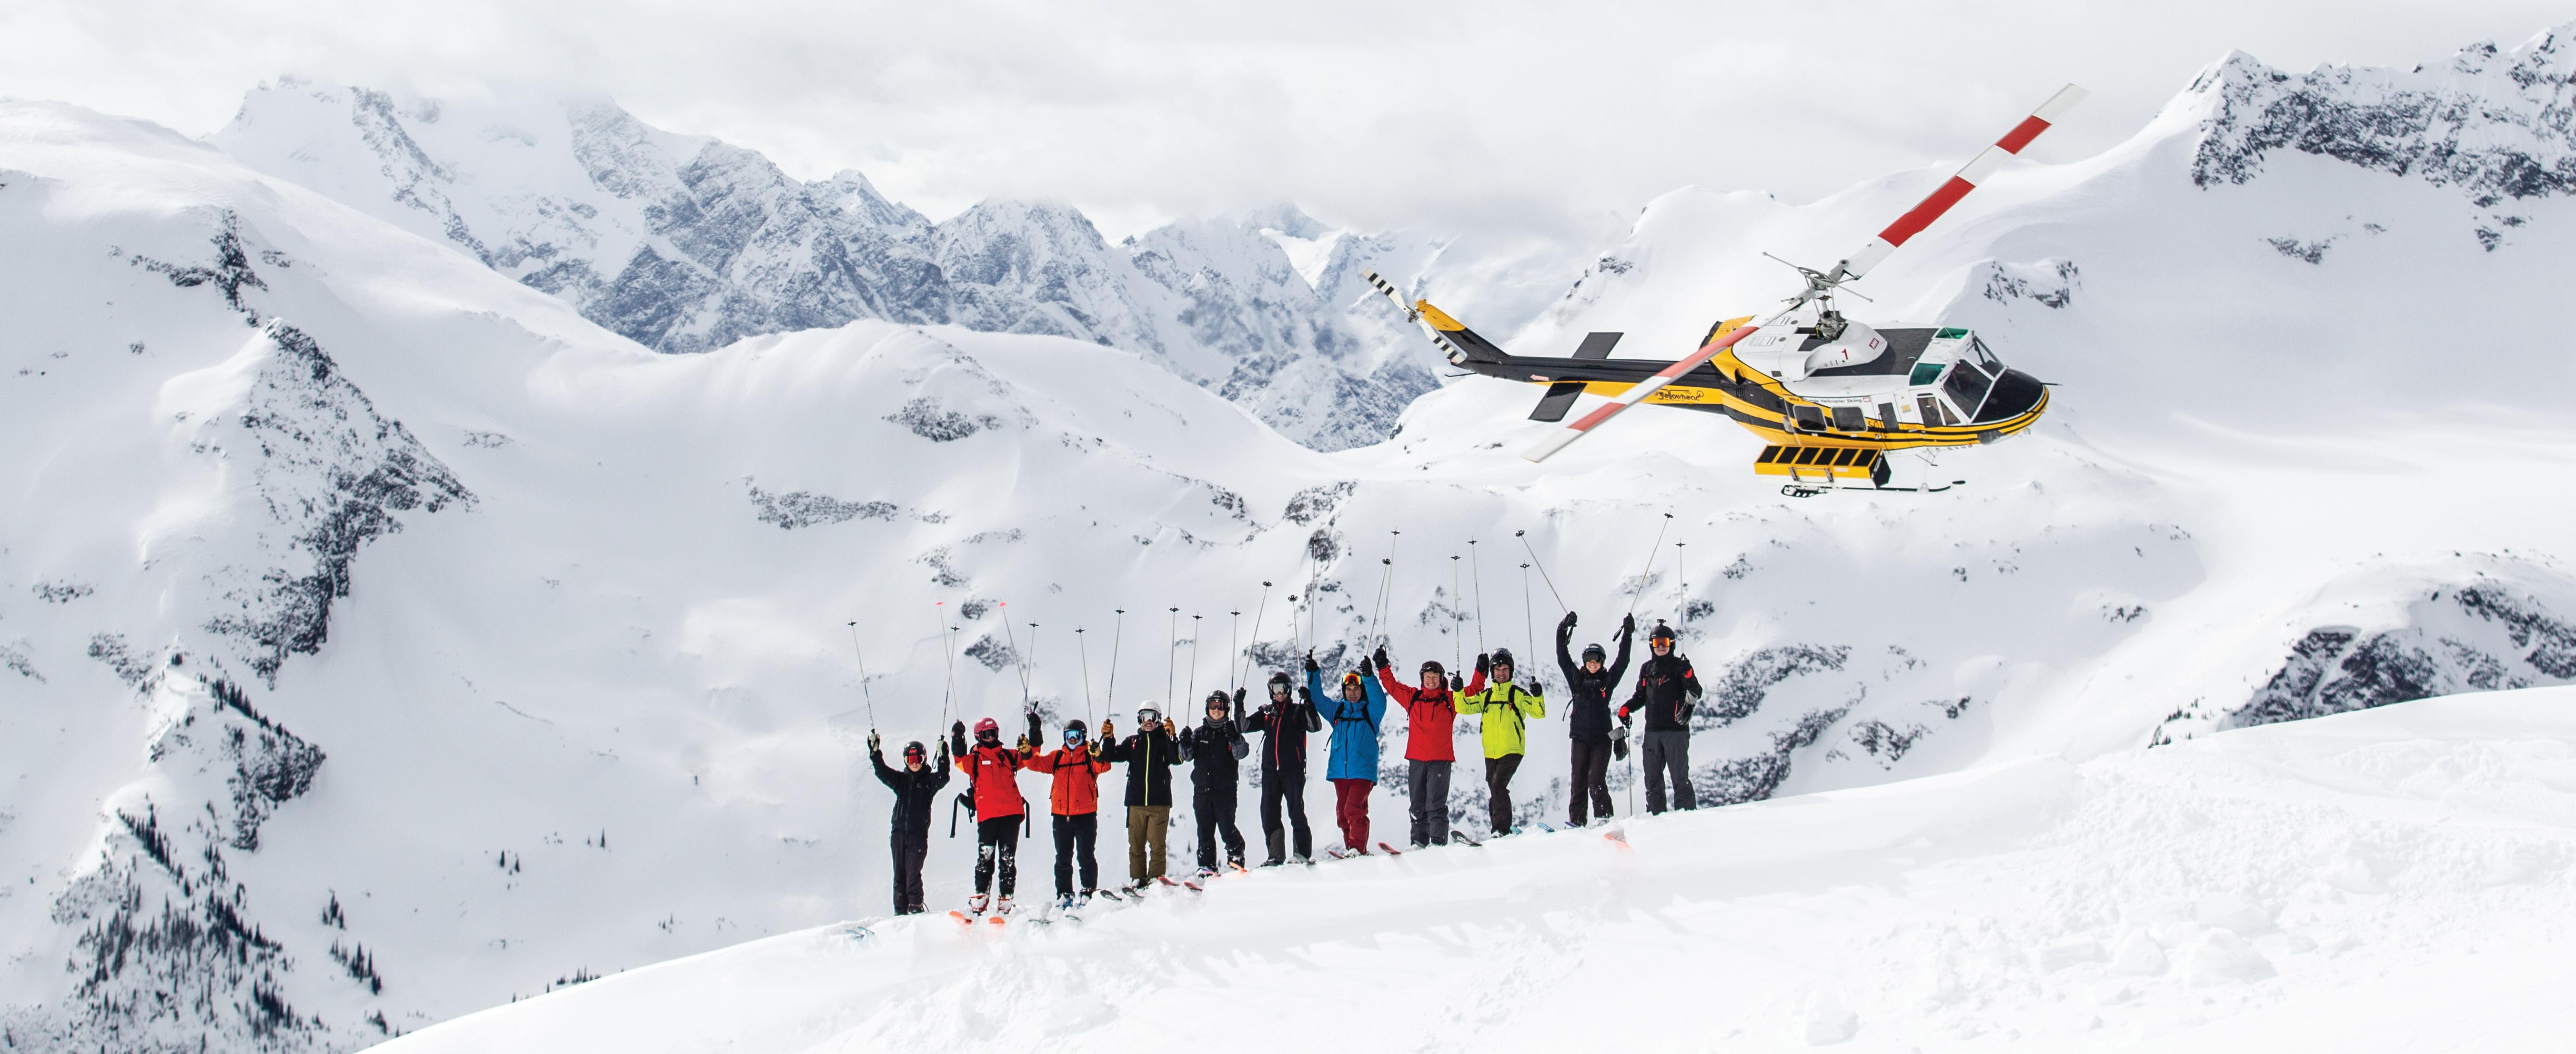 Group of skiers standing in front of a mountain range and a helicopter flying off behind them